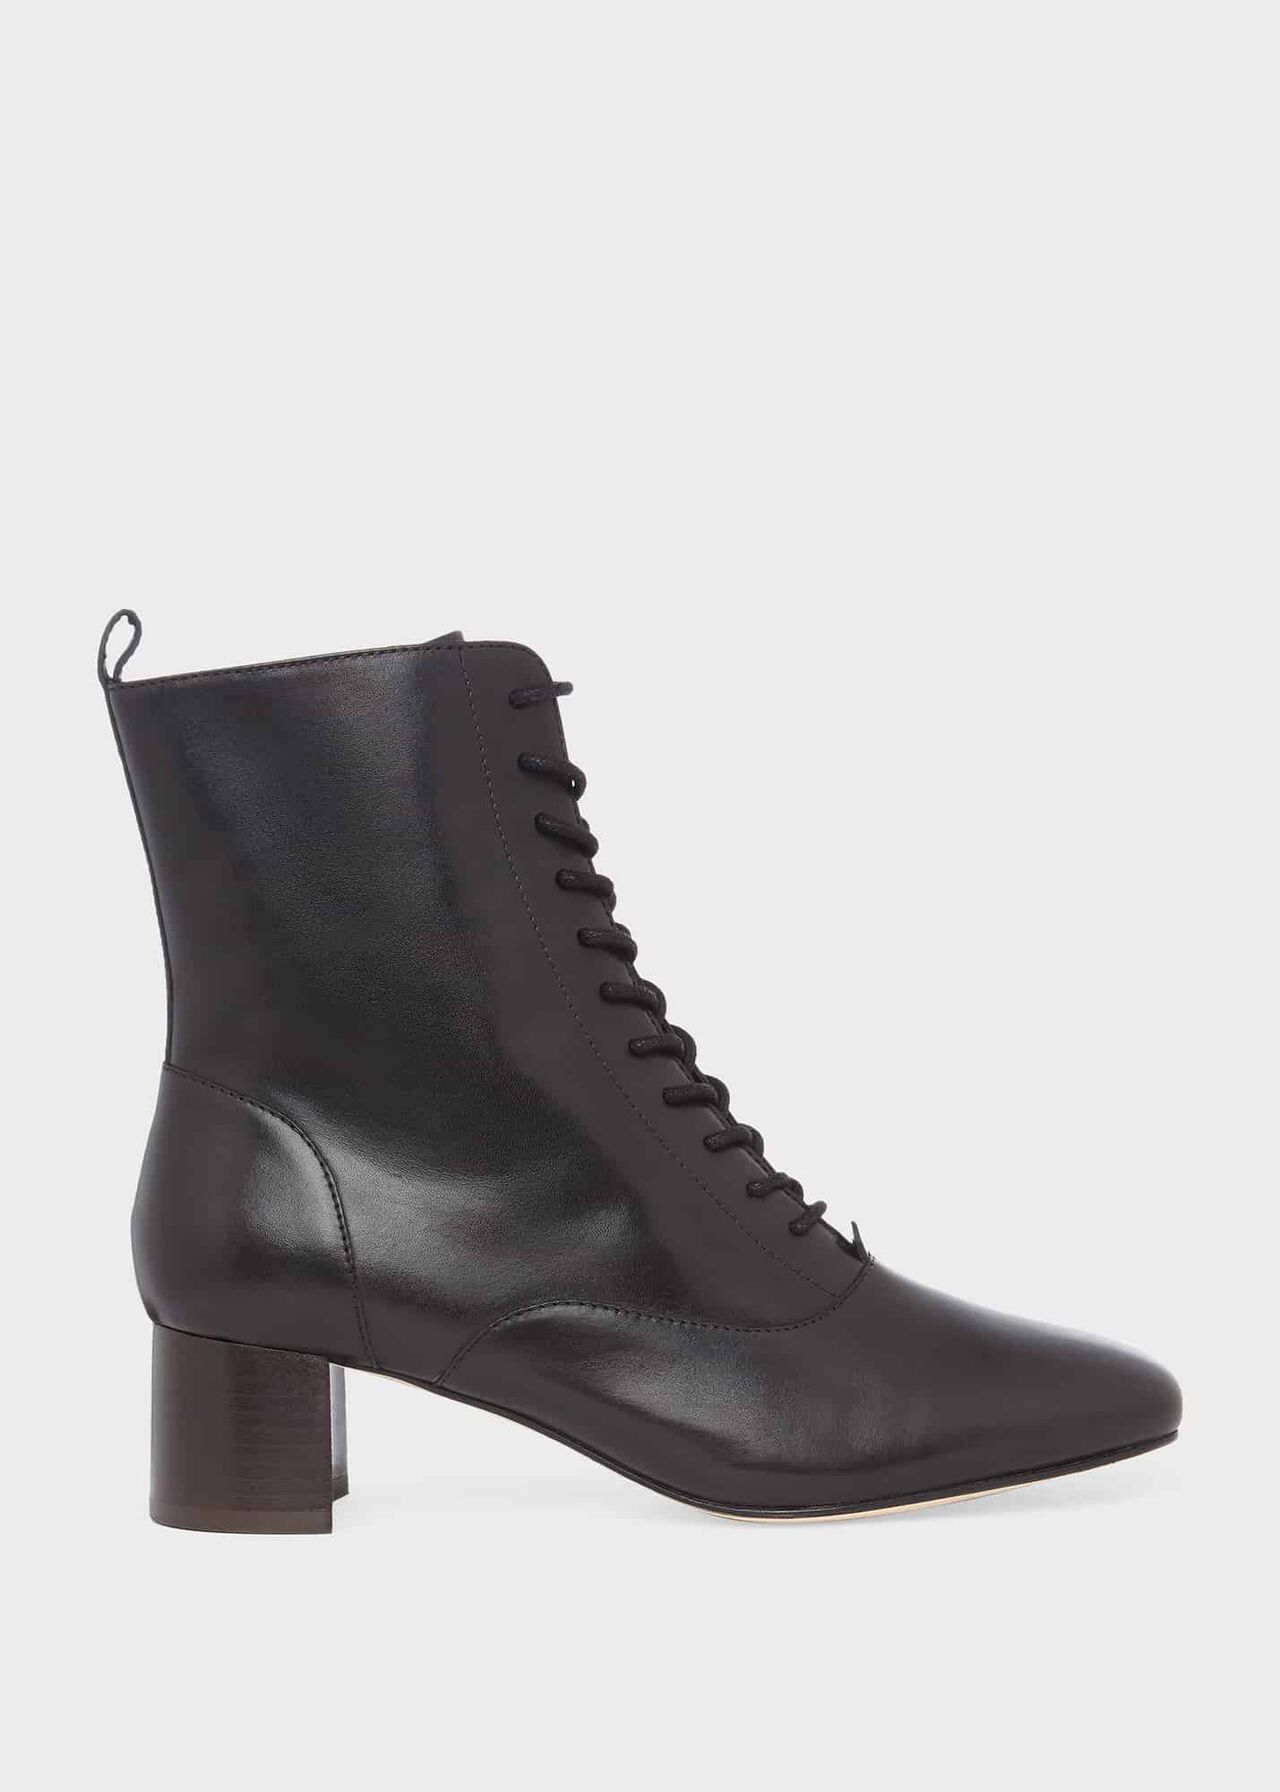 Issy Leather Lace Up Ankle Boots | Hobbs | Hobbs